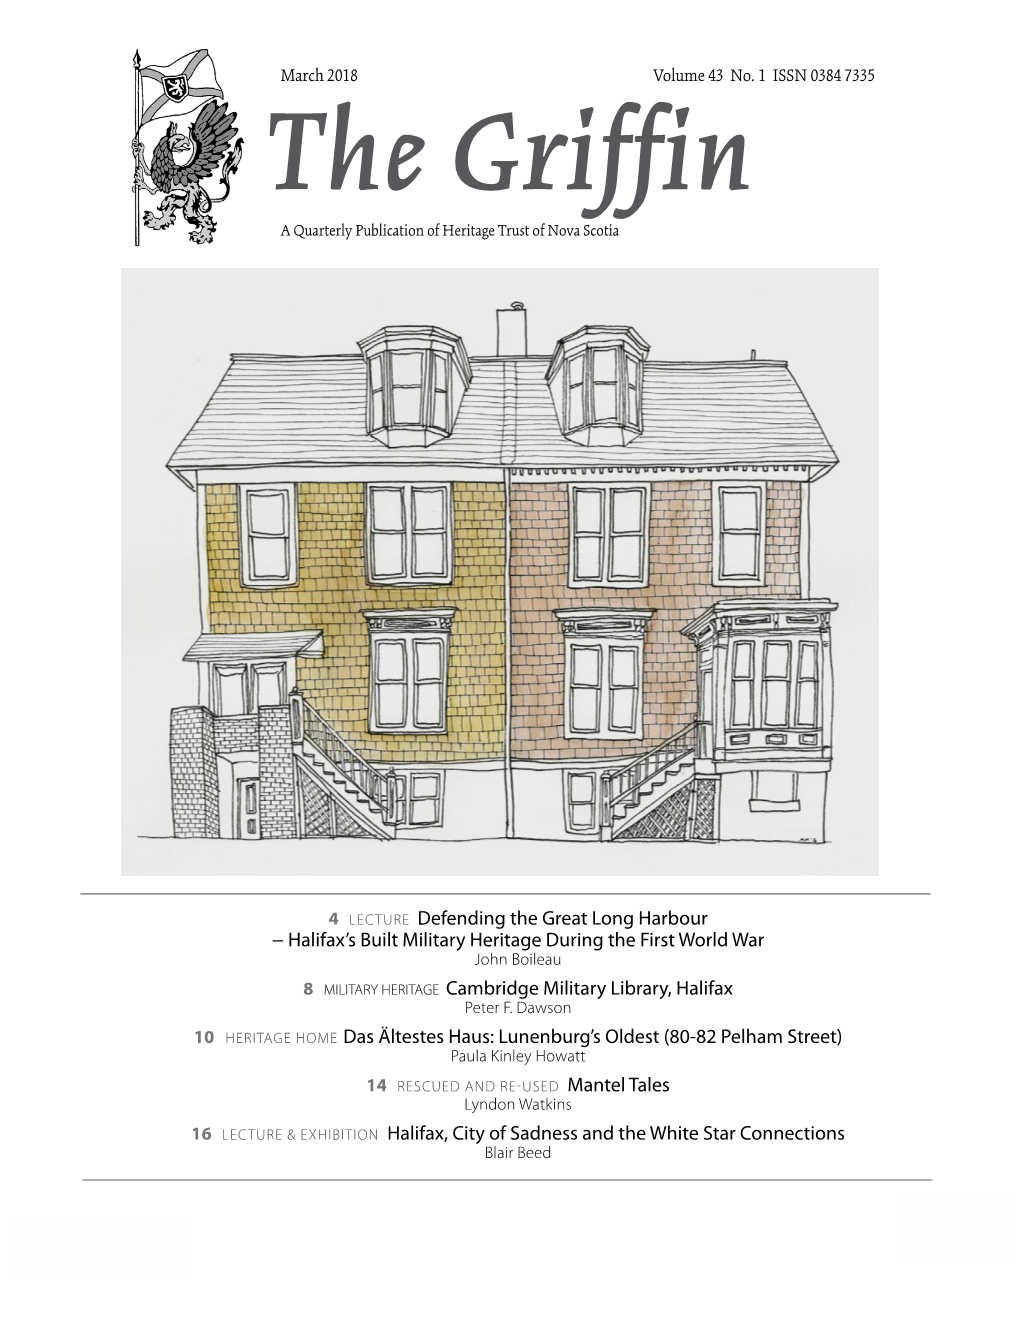 The Griffin a Quarterly Publication of Heritage Trust of Nova Scotia